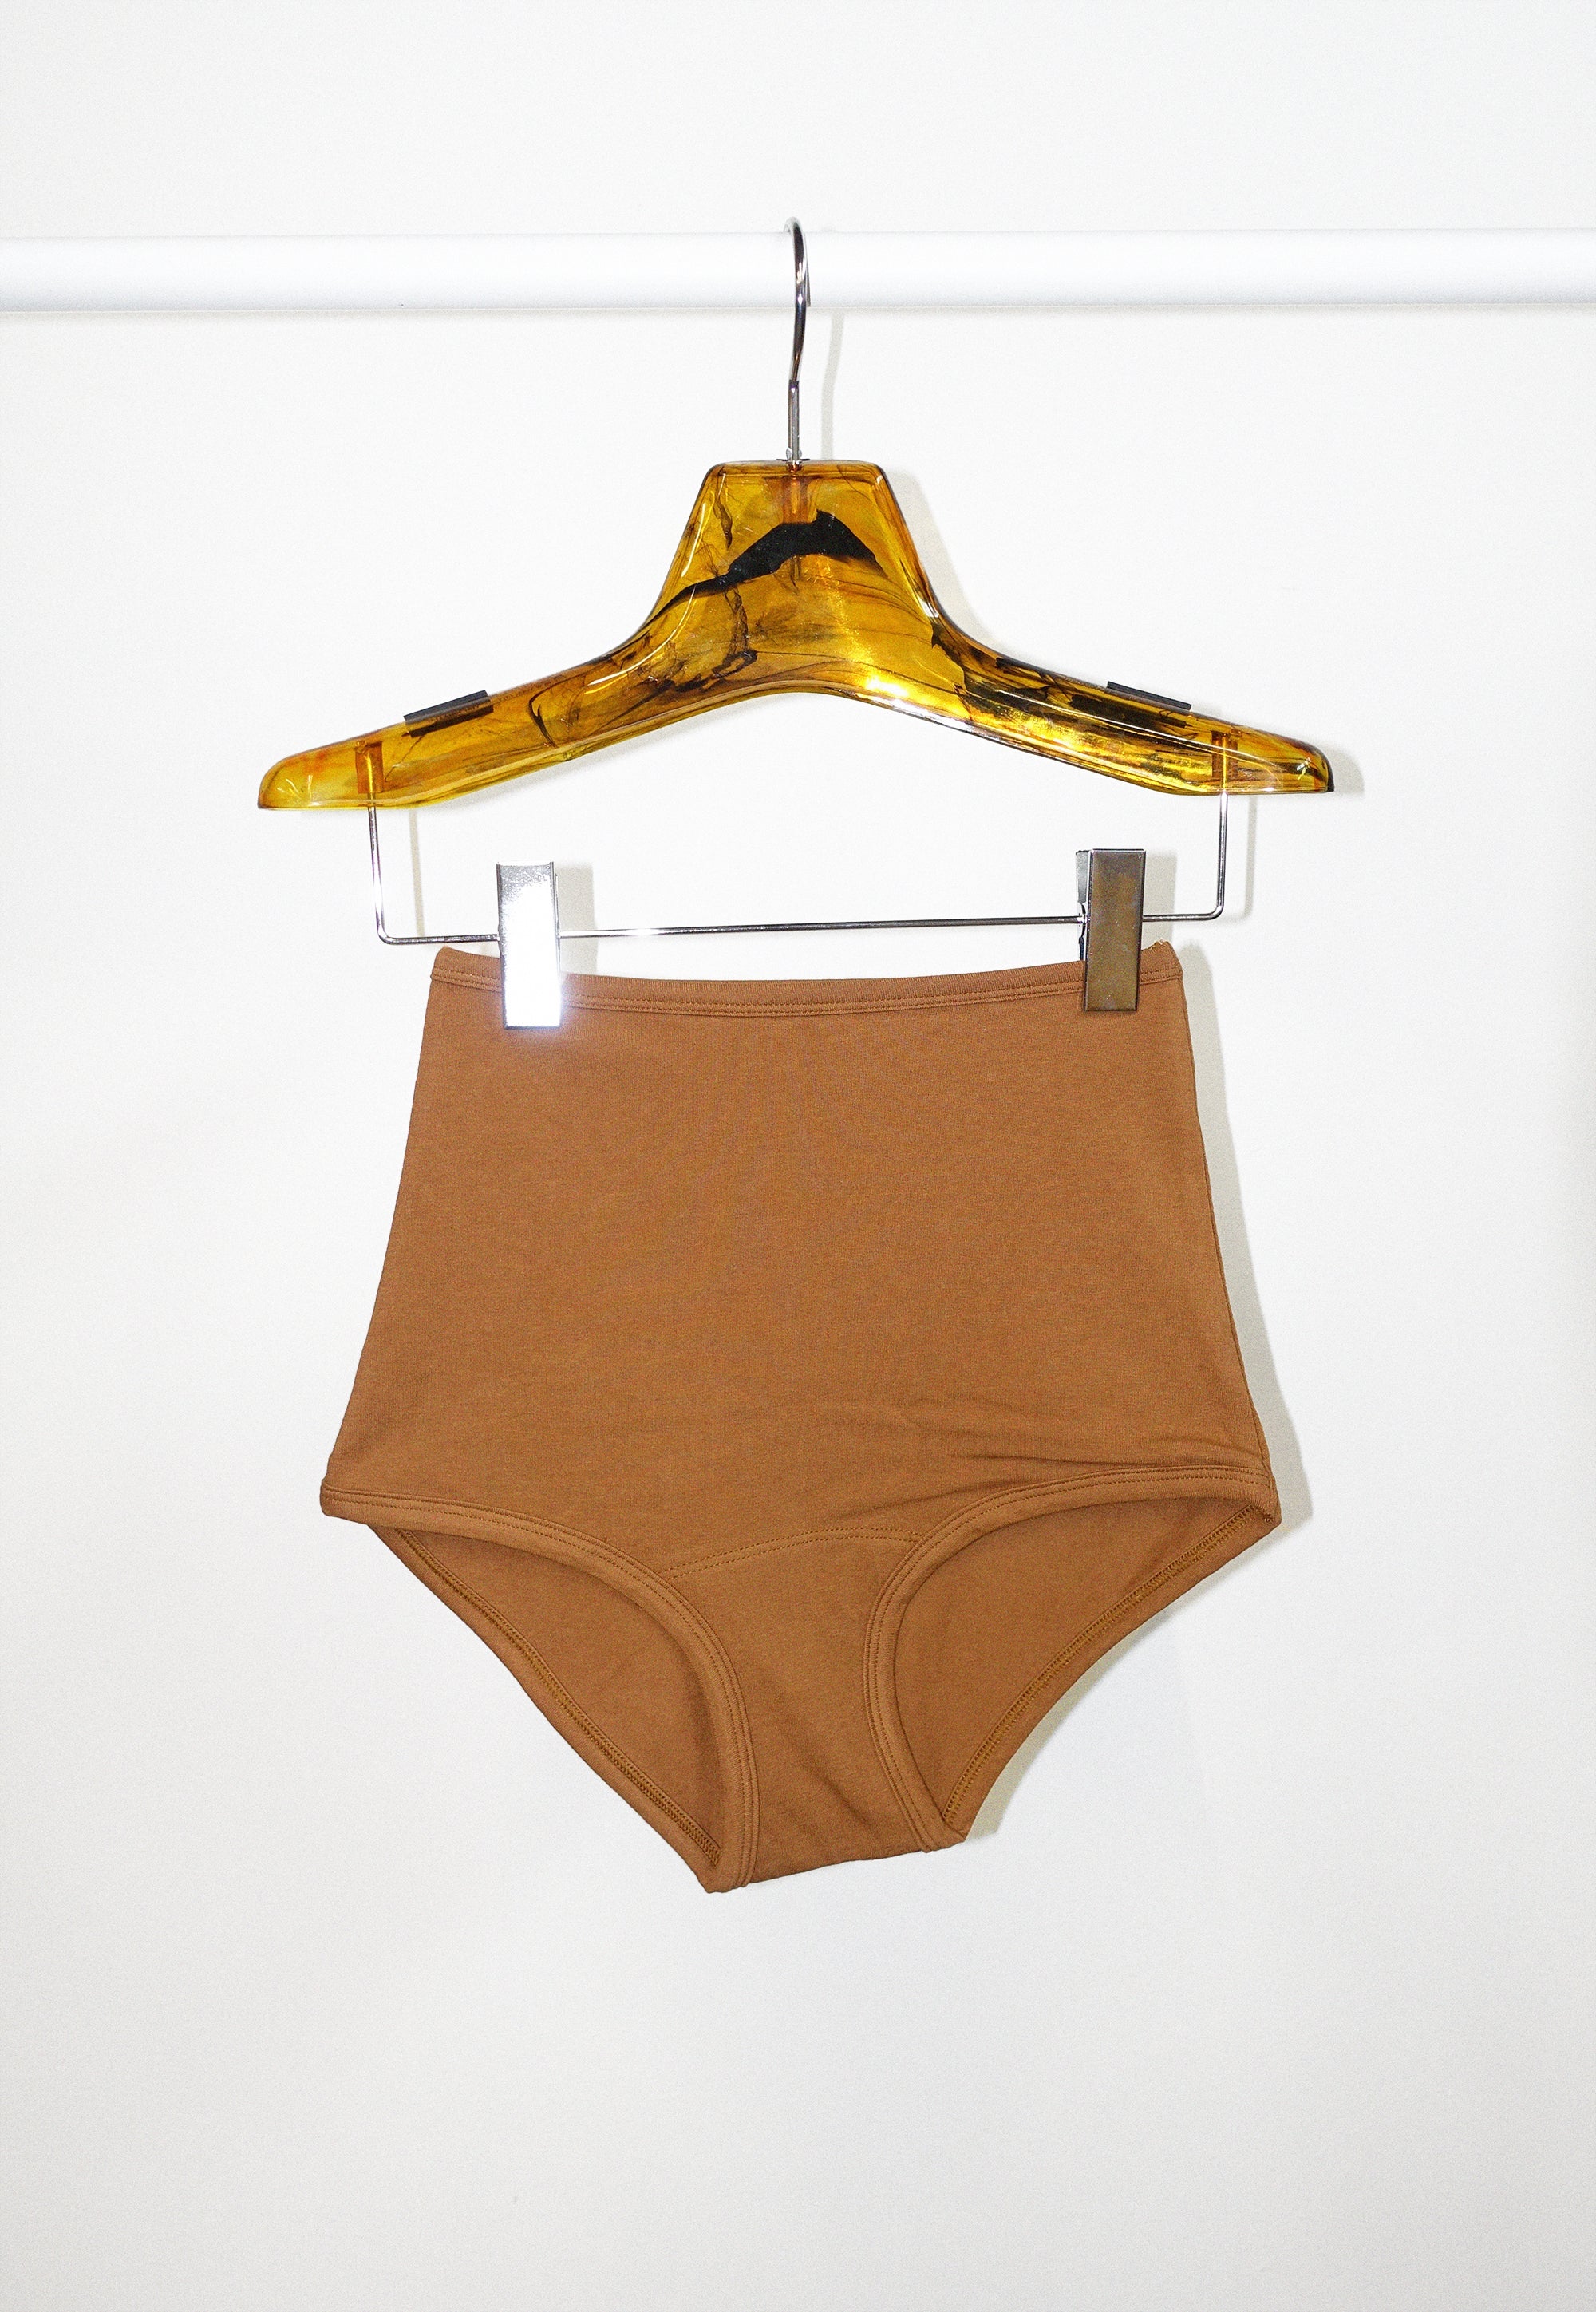 High-Rise Undies in Toffee by Arq